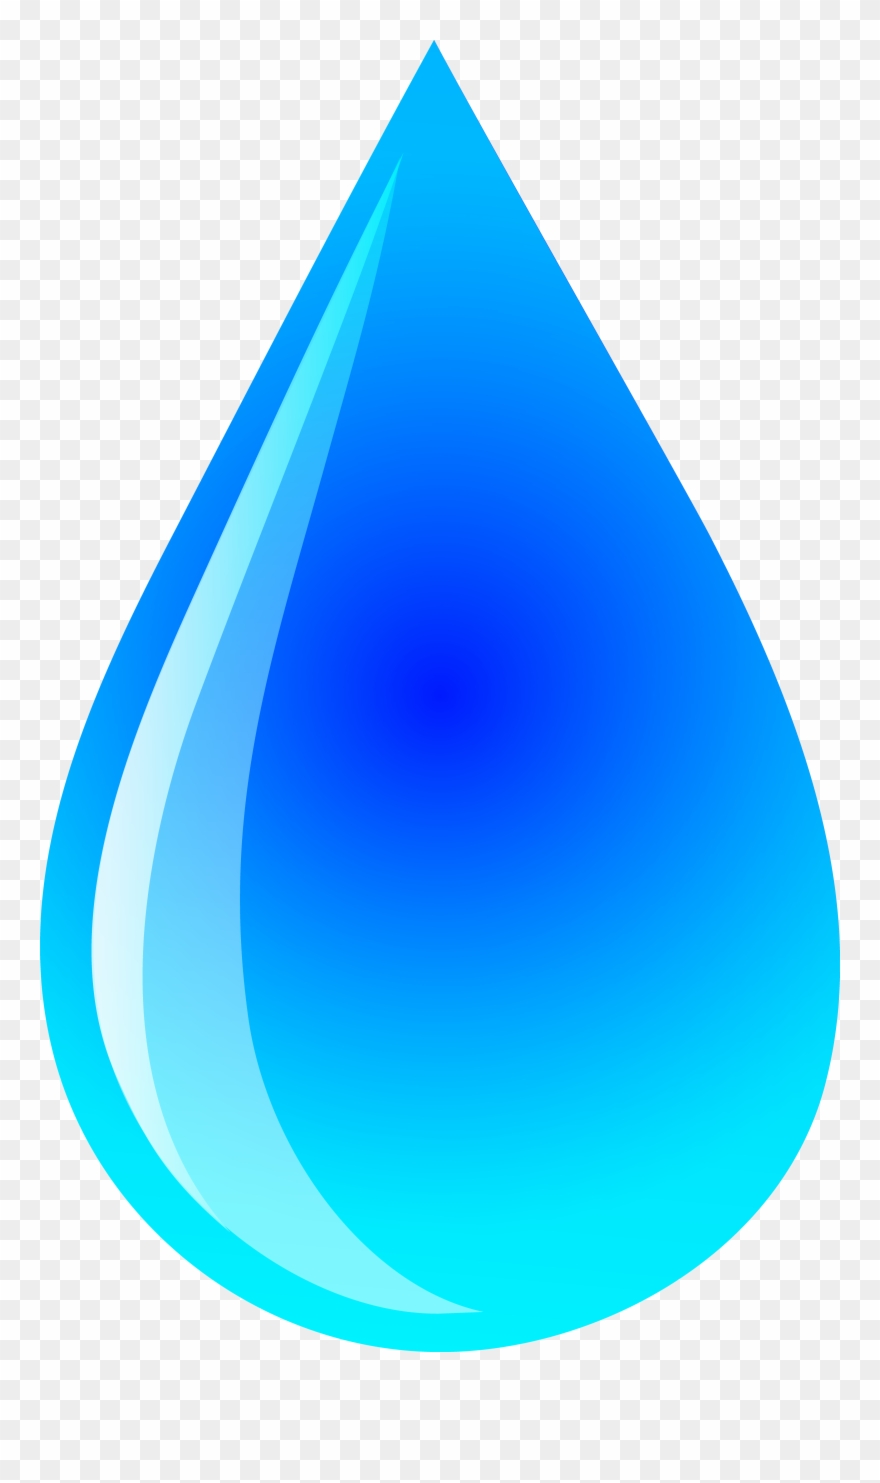  drop clip art. Fountain clipart free water droplet